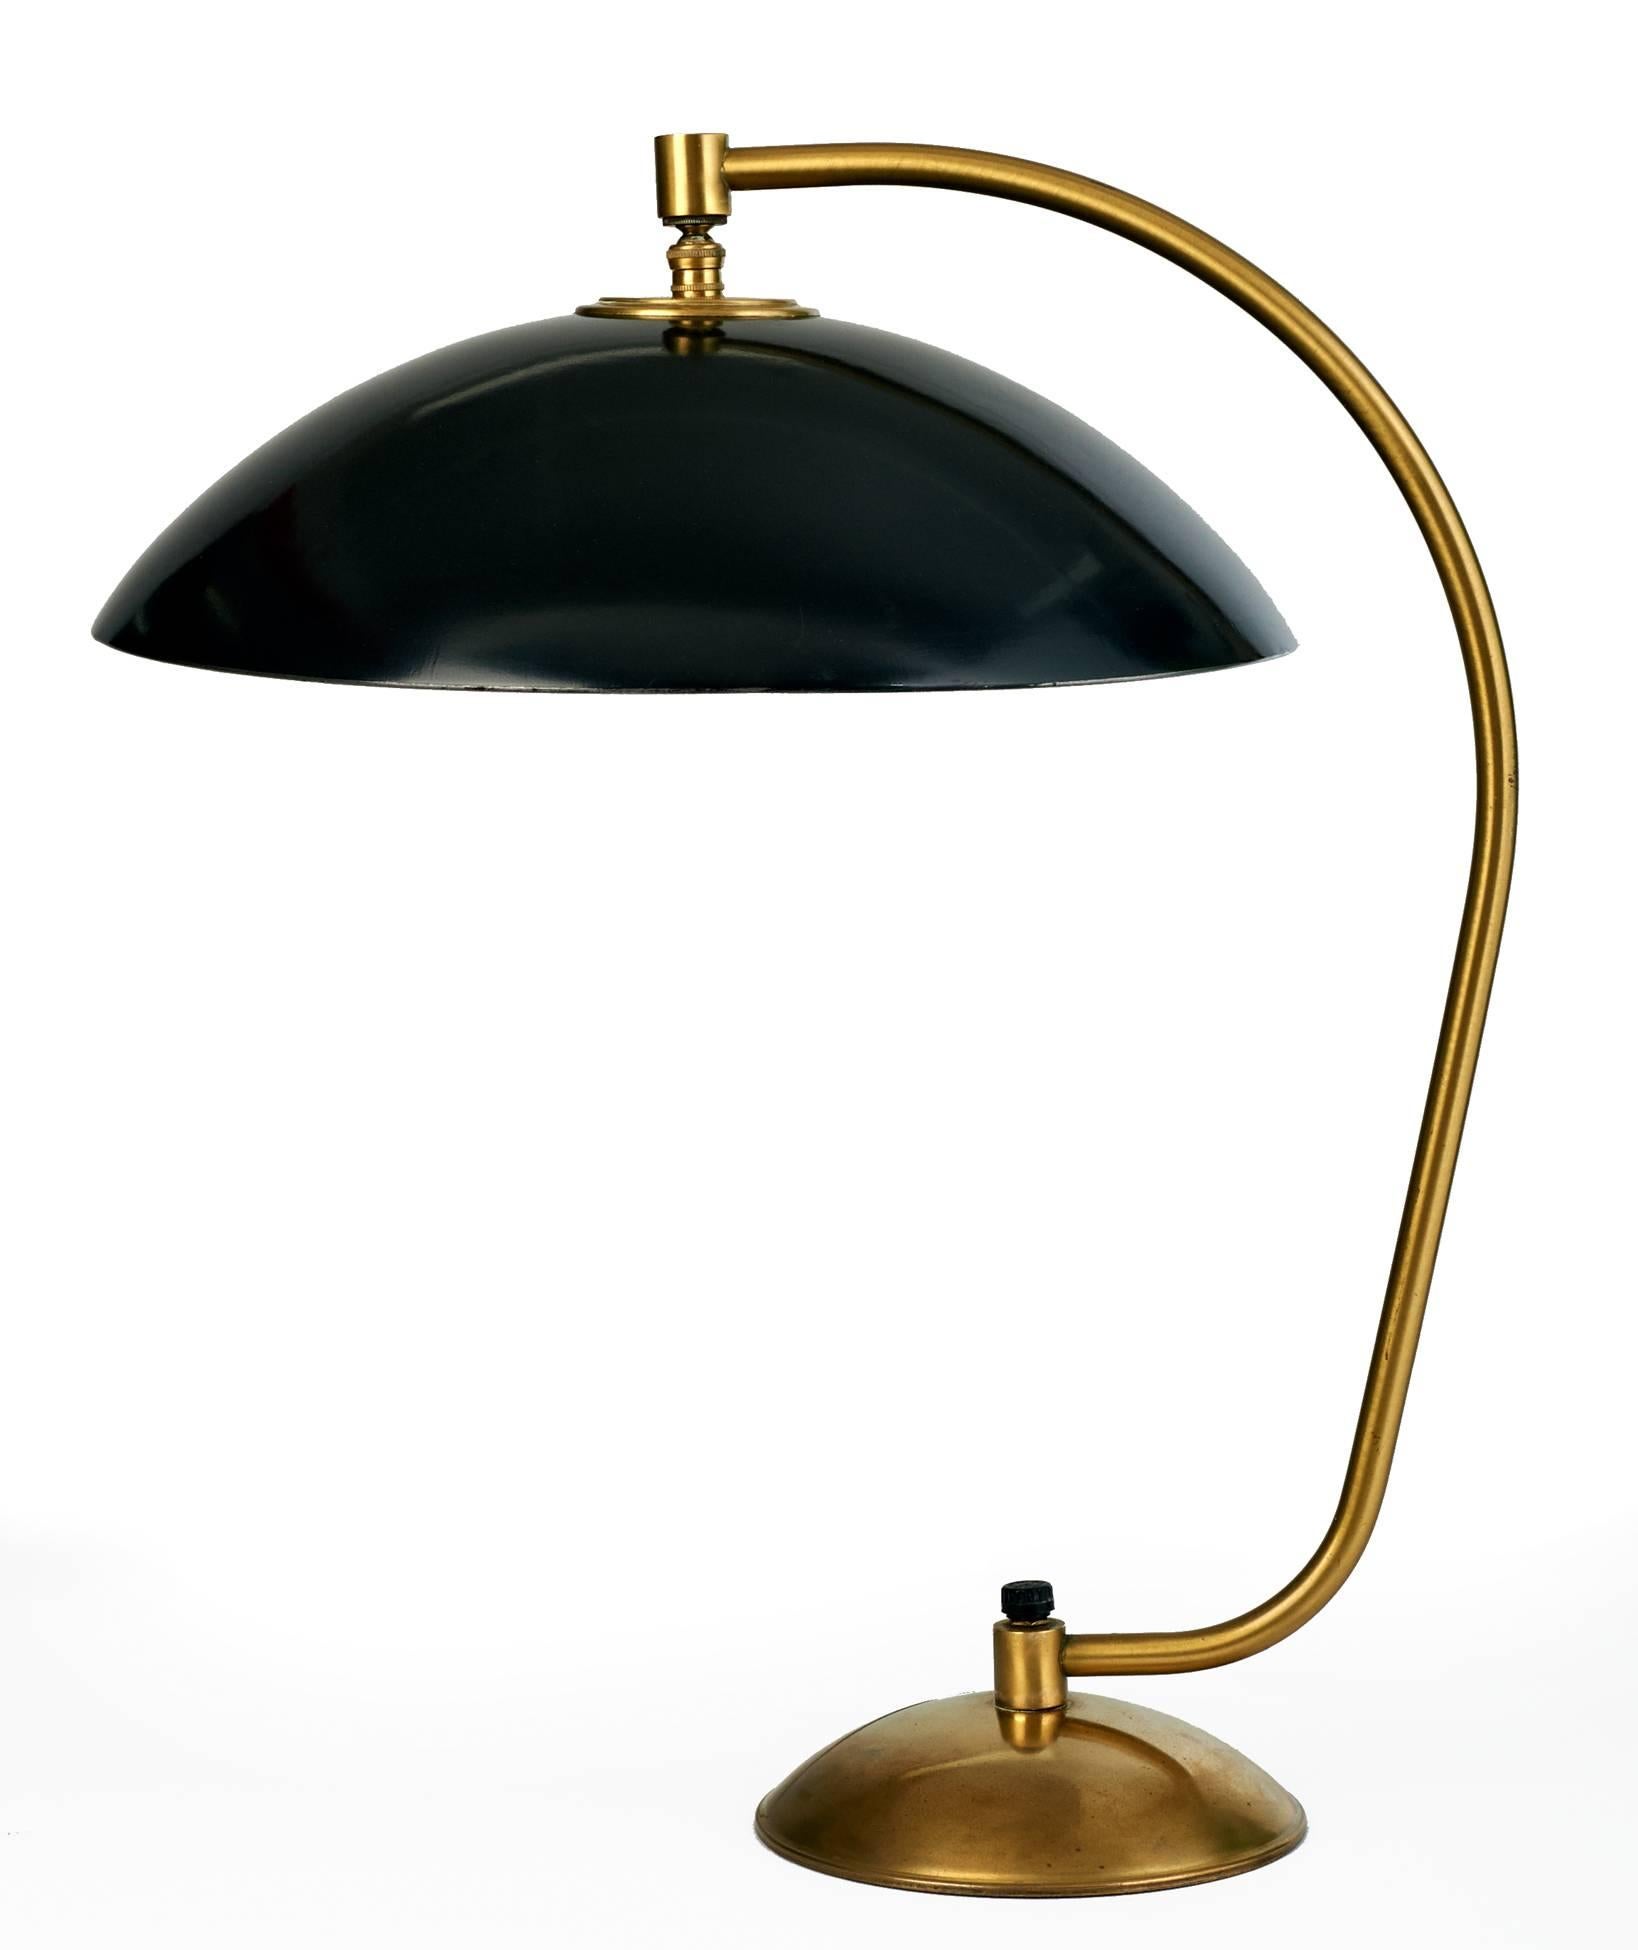 Kurt Versen (1901-1997)

Rare modernist enameled steel and brass table lamp by Kurt Versen. A curved shade, enameled in black with a white interior, overhangs a spare, sculptural tubular brass stem anchored by a rounded hemispheric base that subtly